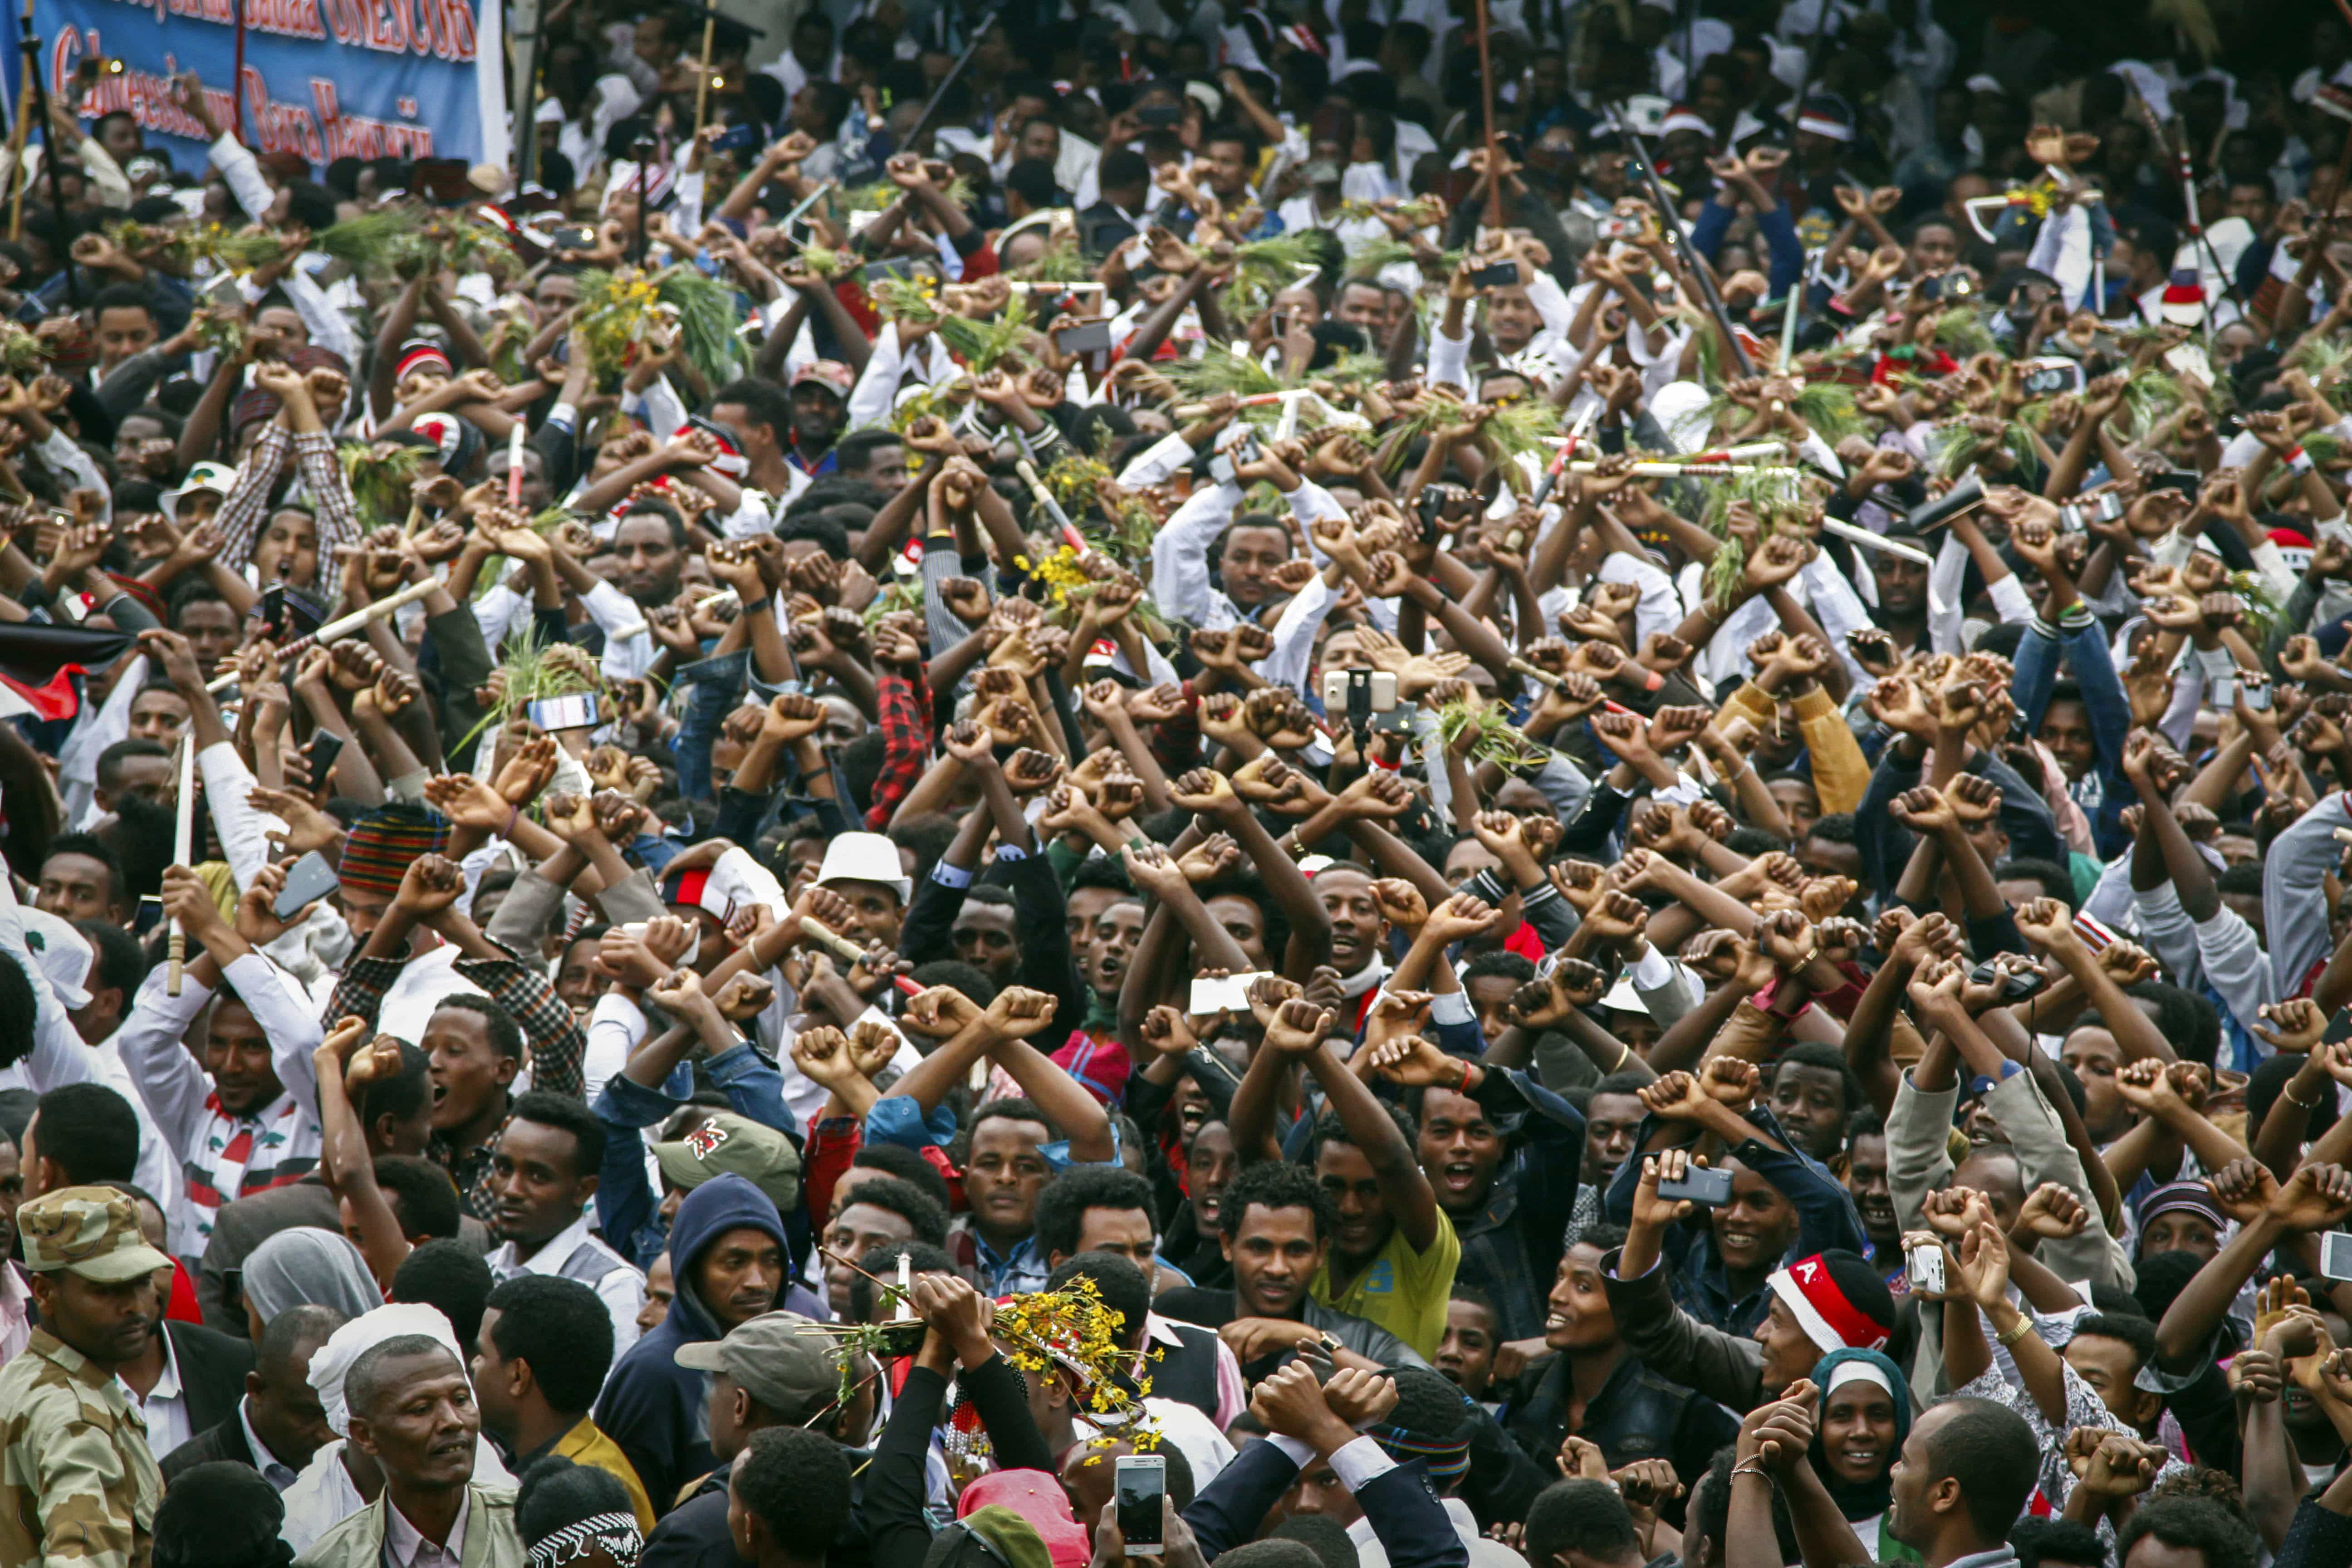 Ethiopians chant slogans against the government during a march in Bishoftu, Ethiopia, 2 October 2016., AP Photo